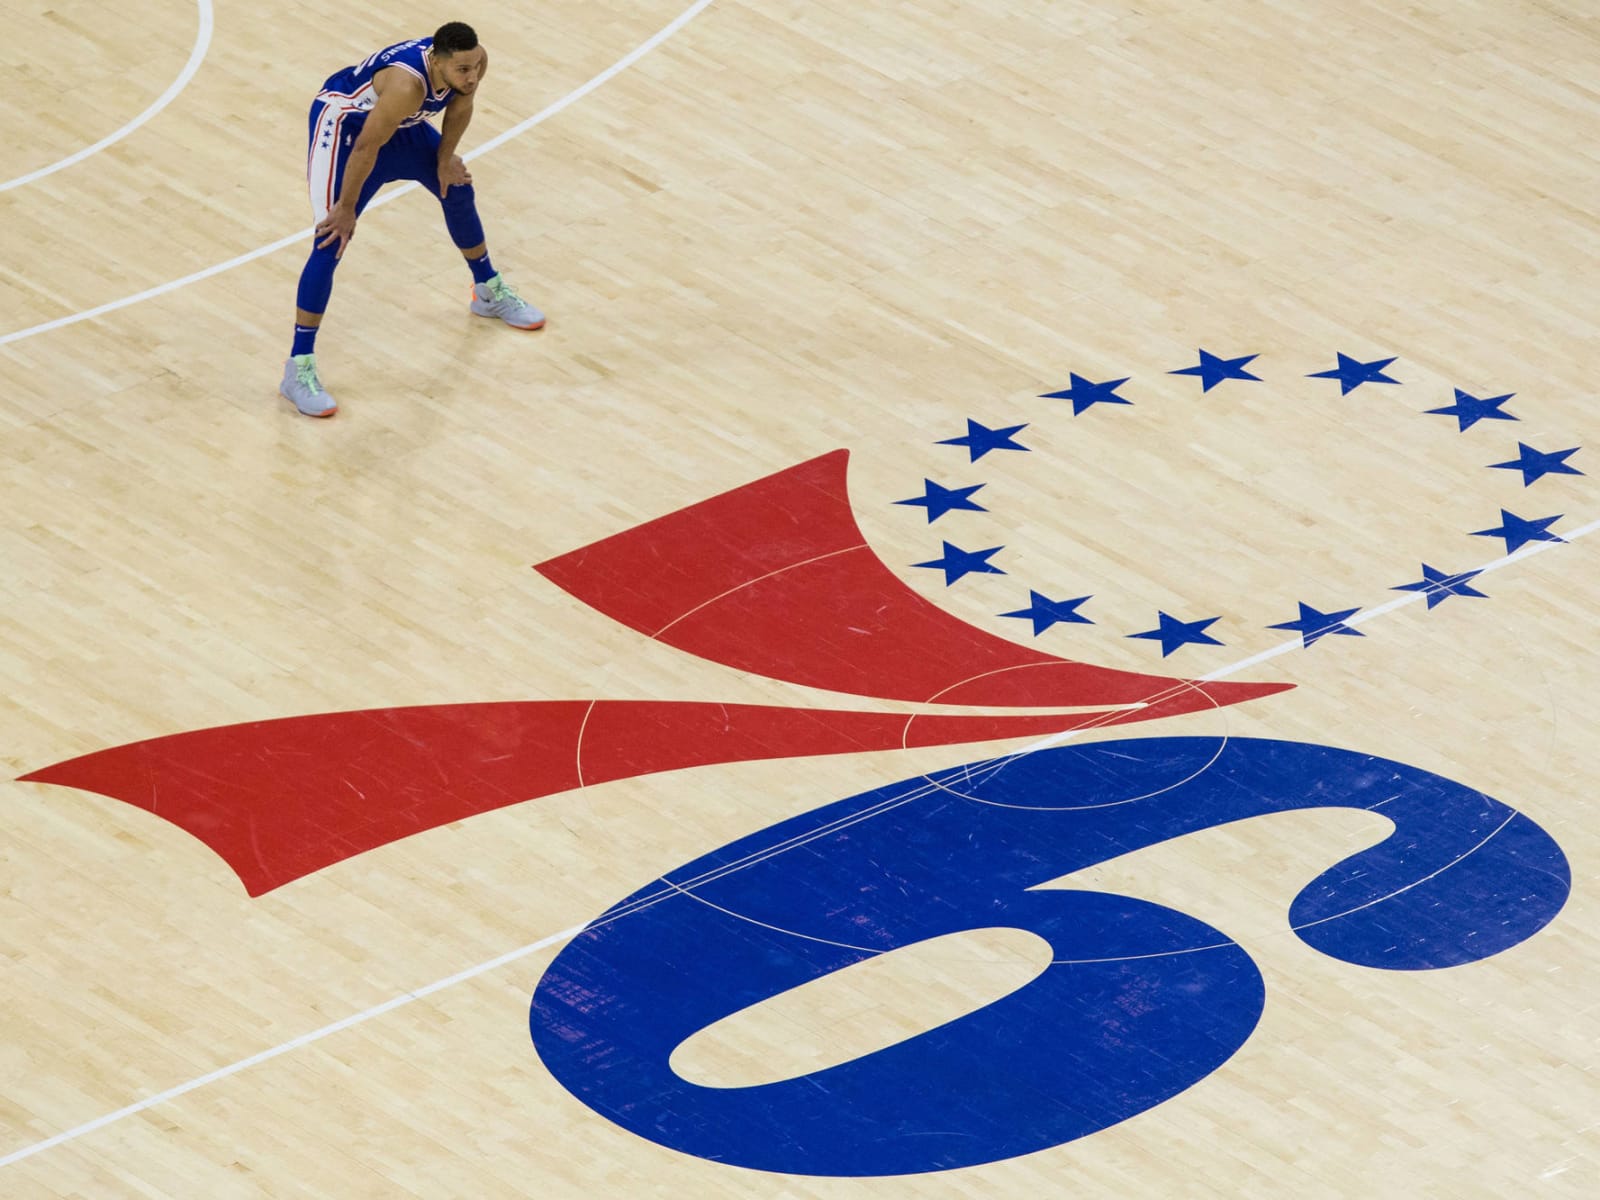 76ers: City Edition jersey has possible Trust the Process reference?